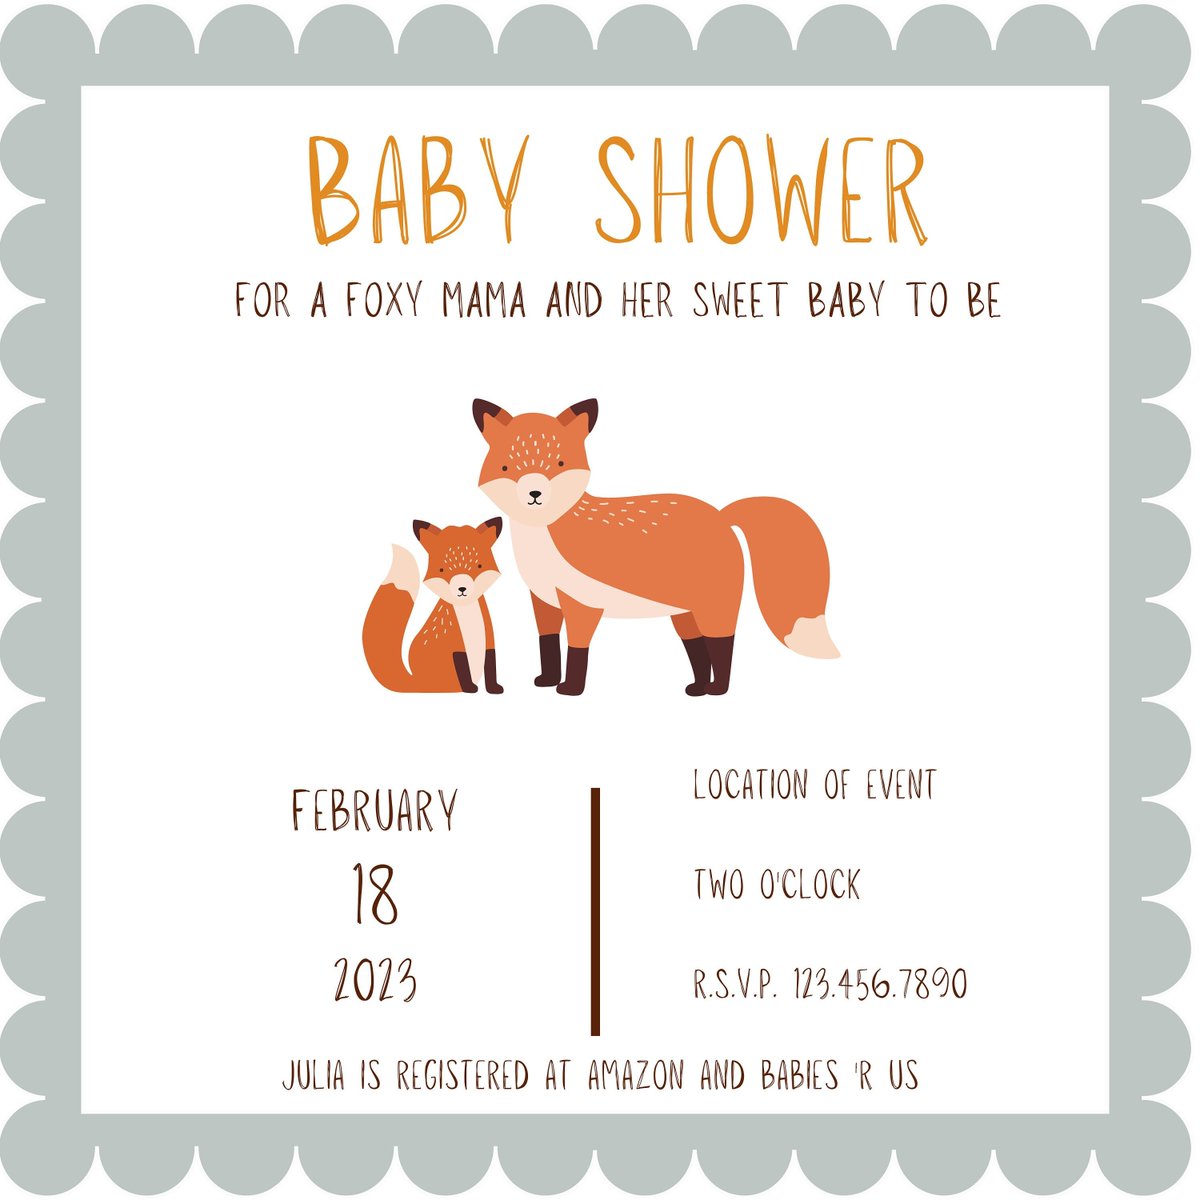 Excited to share the latest addition to my #etsy shop: Baby Shower Invitation/Welcome Baby/Baby Birth/New Baby/Digital Baby Shower Invitation/Digital Download etsy.me/3Uf0GR3 #babyshower #babyshowerinvite #babyinvite #showerforbaby #newborn #welcomebaby #foxyma